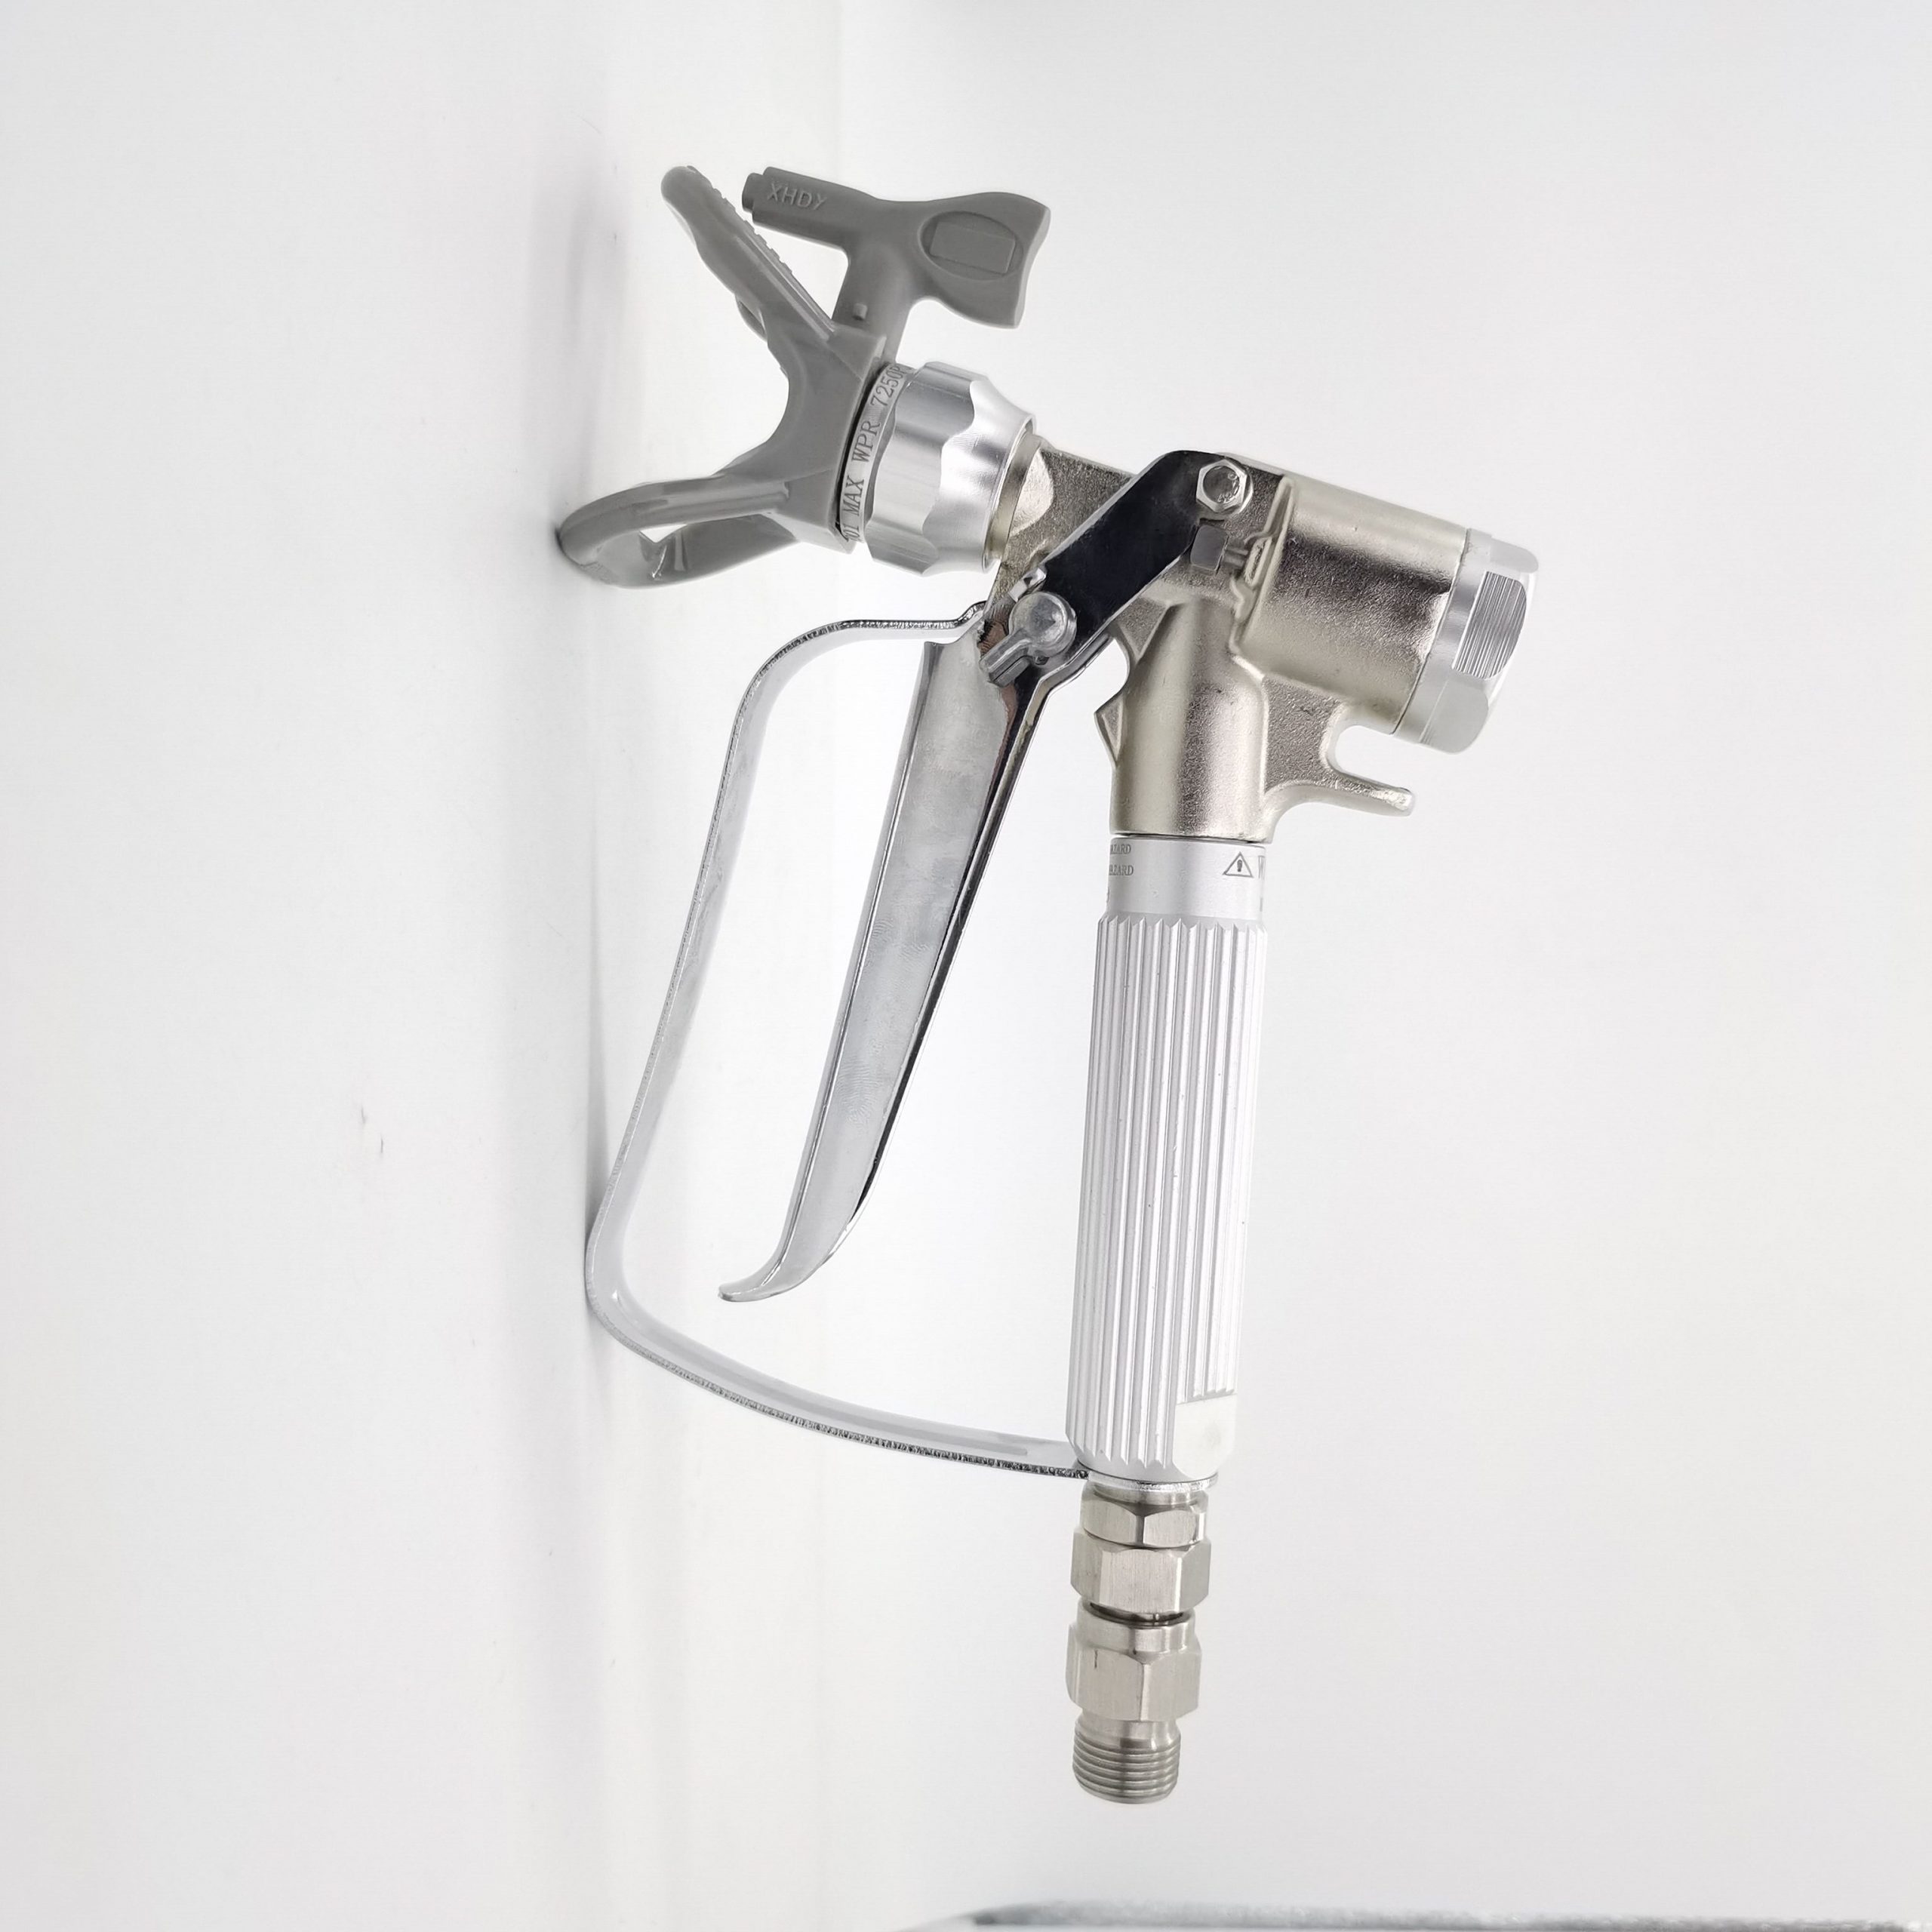 DP-6374 500bar airless paint spray gun with high pressure tip and tip guard